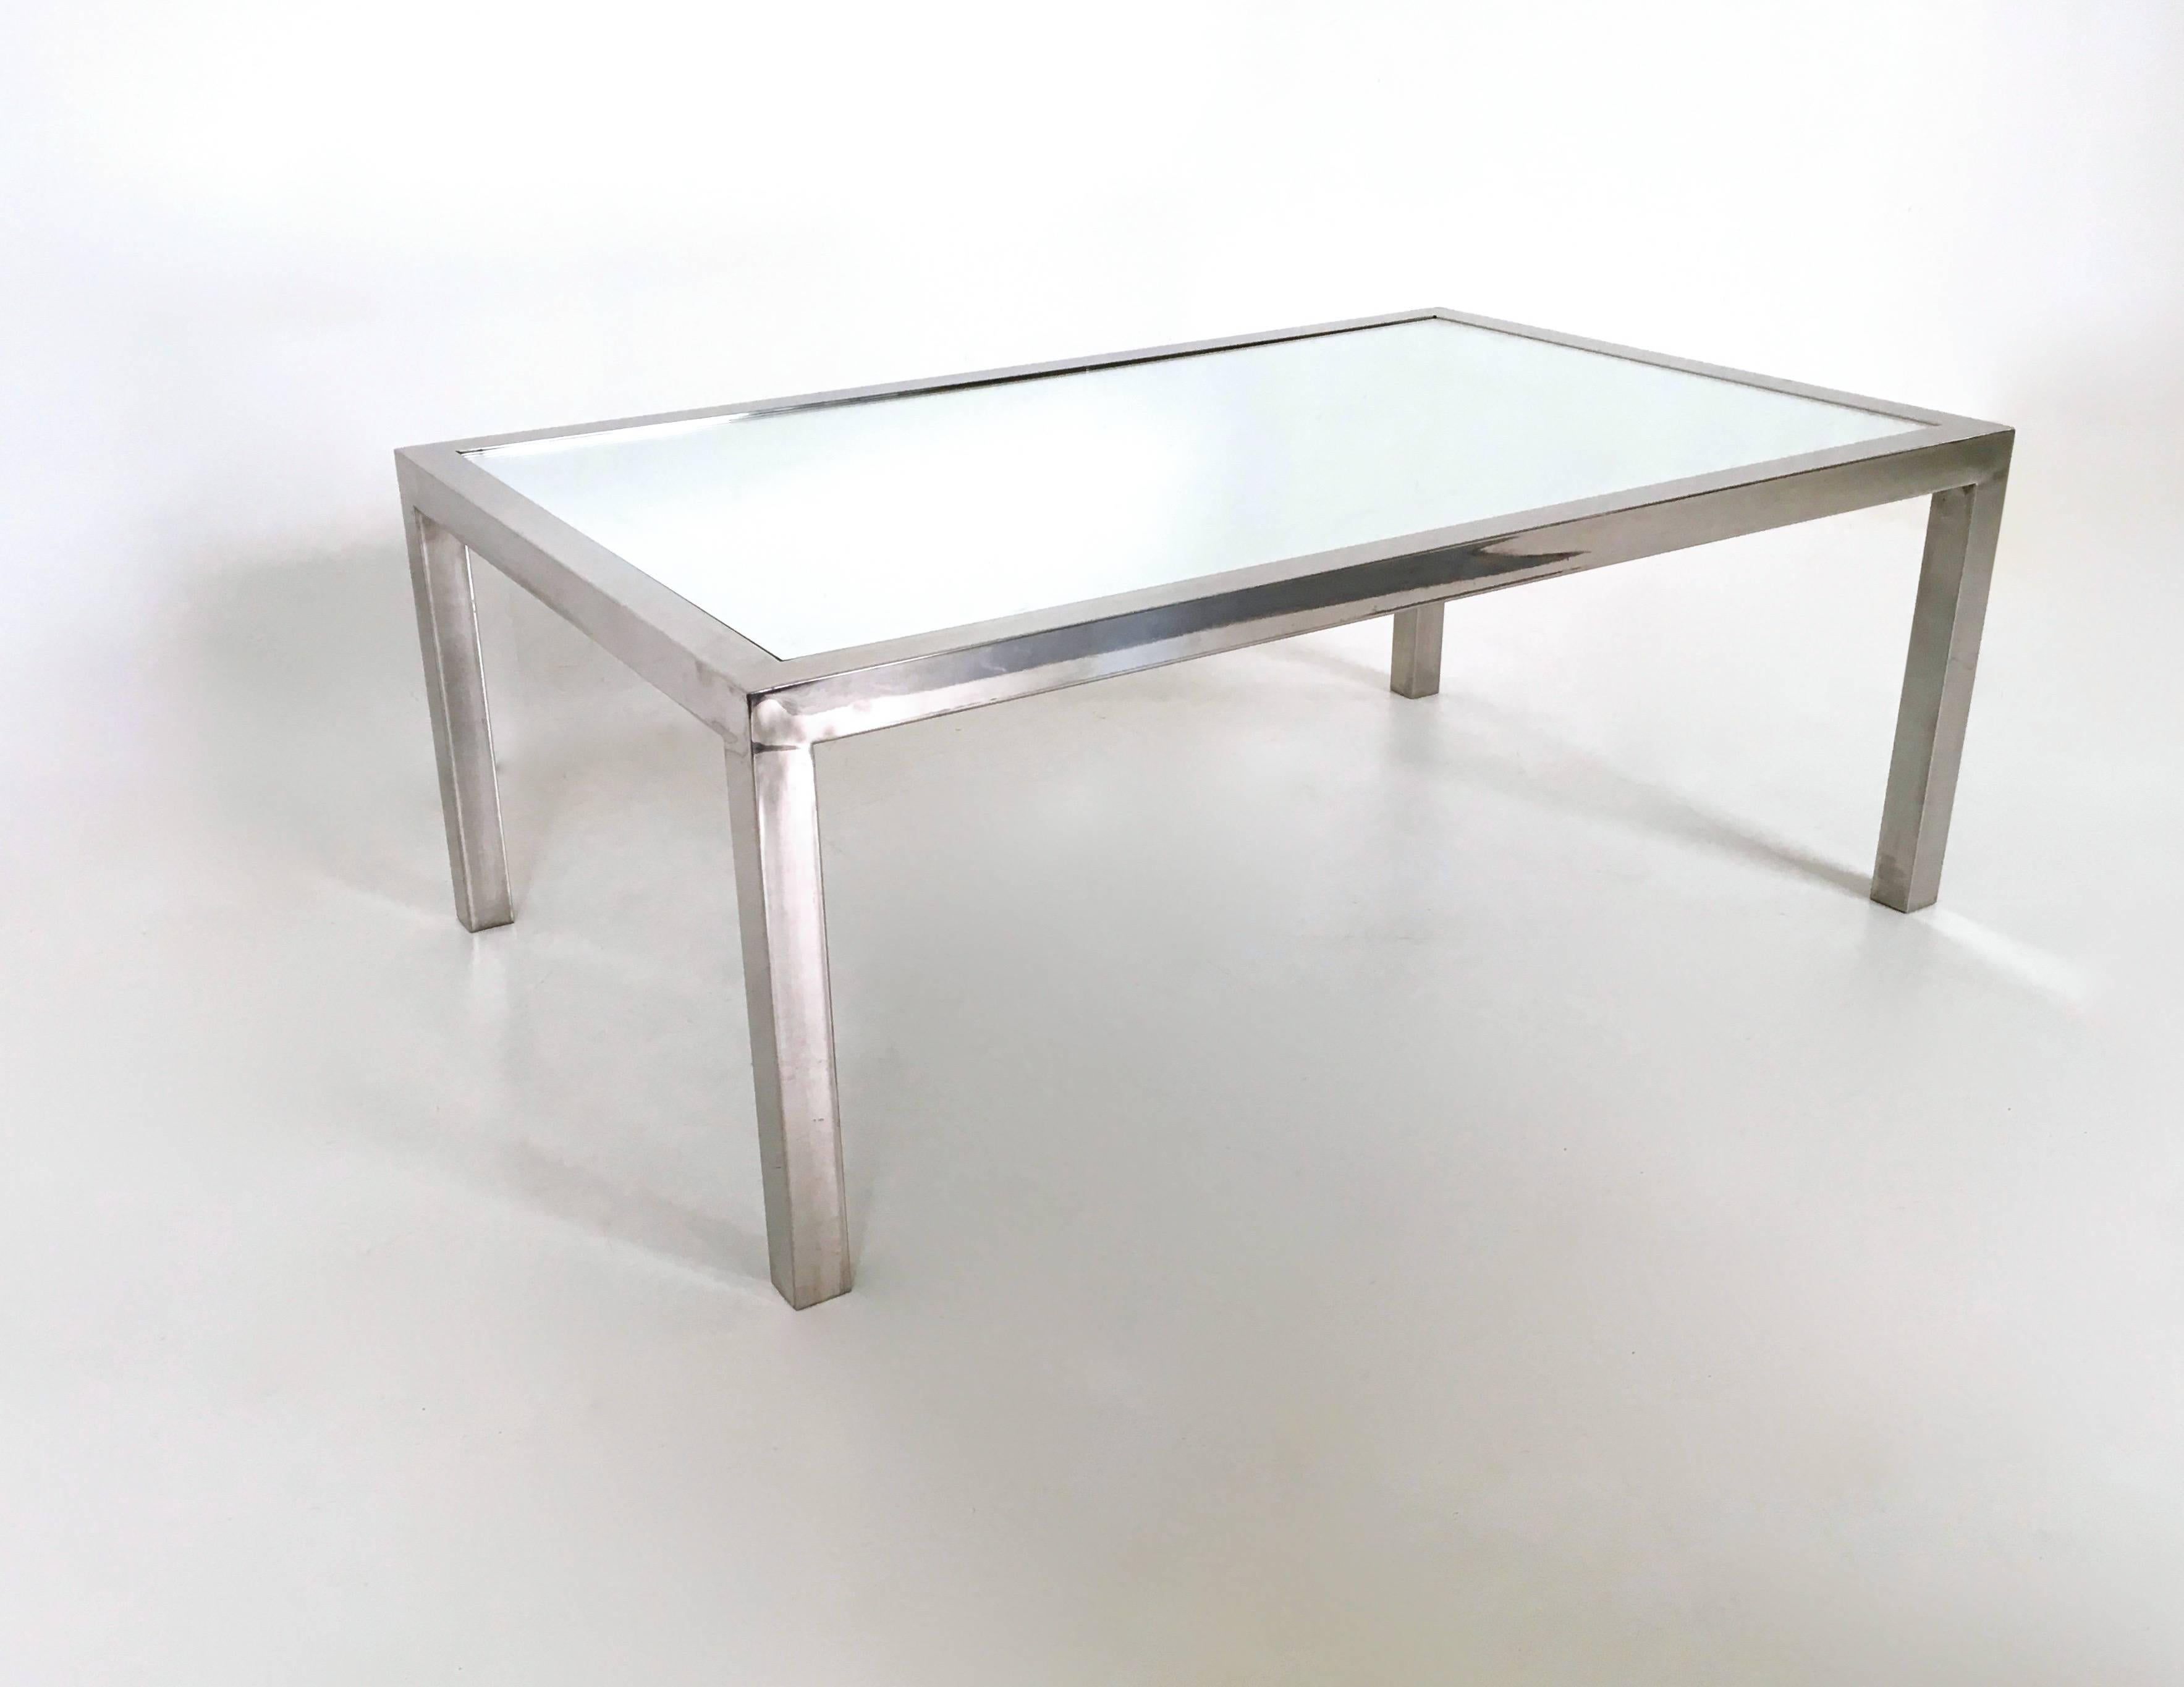 Post-Modern Vintage Steel Coffee Table in the Style of Nanda Vigo with a Mirrored Top, Italy For Sale